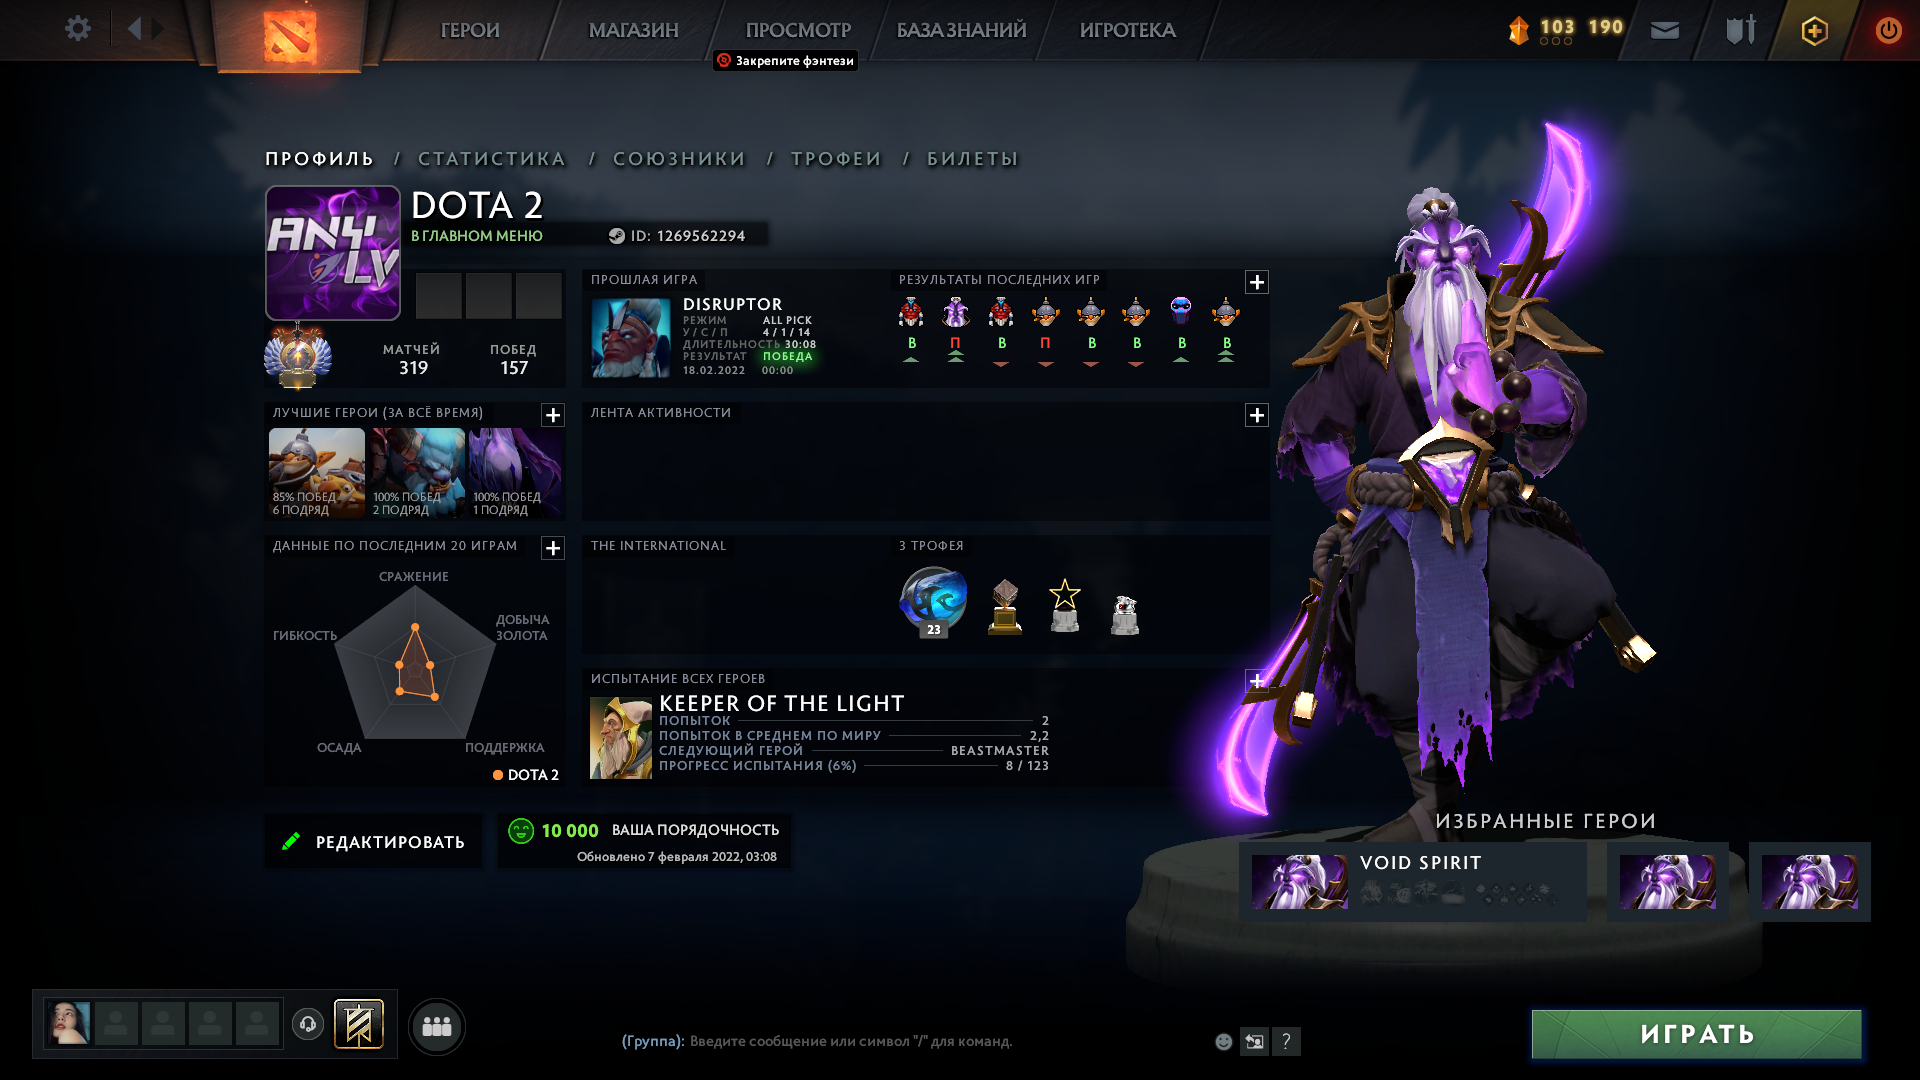 Buy on account 5670 solo MMR, 0 Party MMR